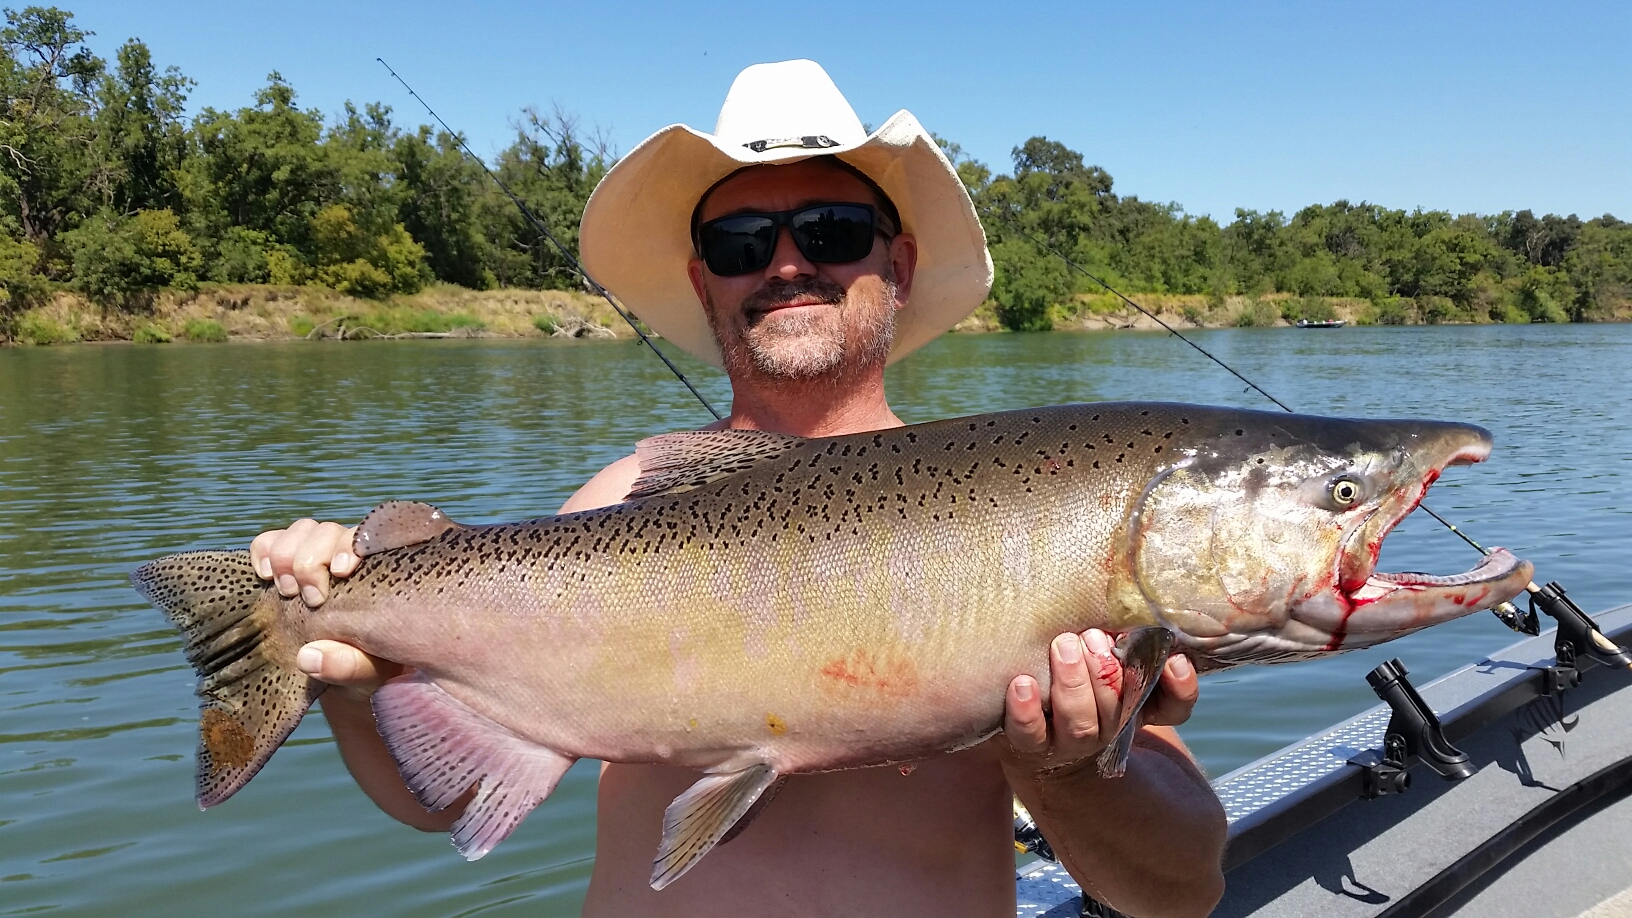 Todays report from the Lower Sac salmon scene.